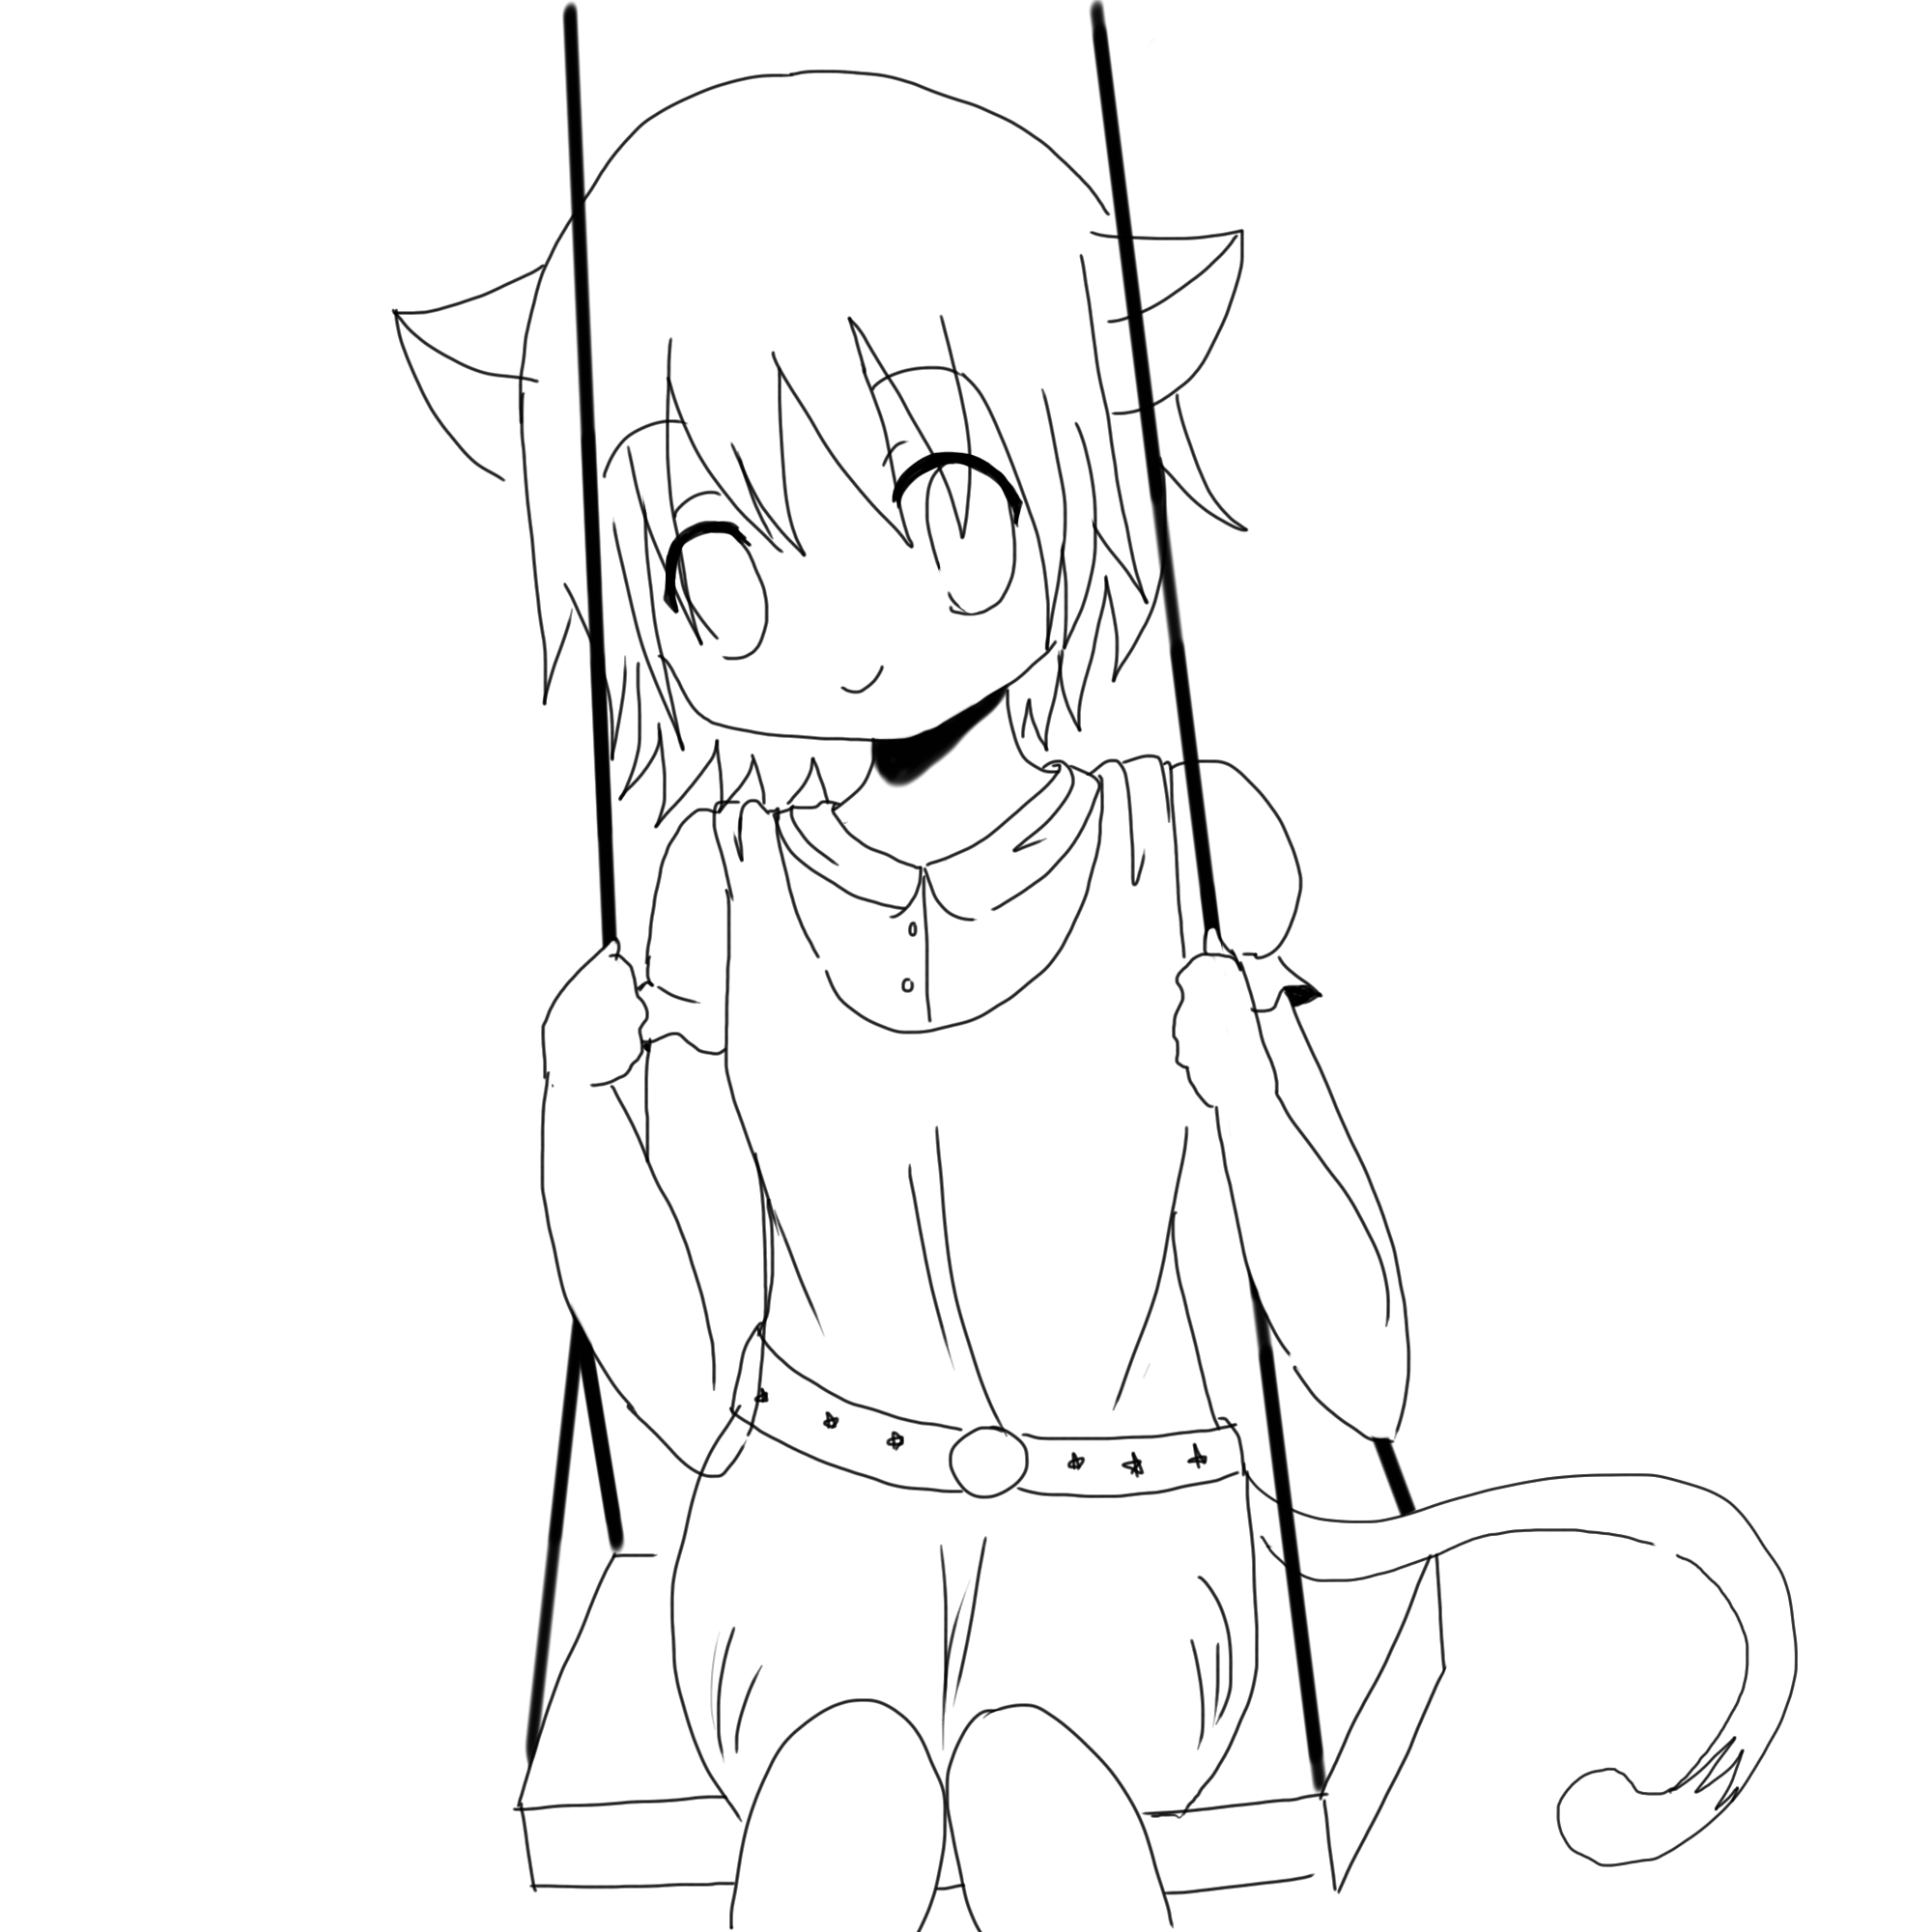 12 Pics of Anime Cat Girl Warrior Coloring Pages - Anime Warrior ...